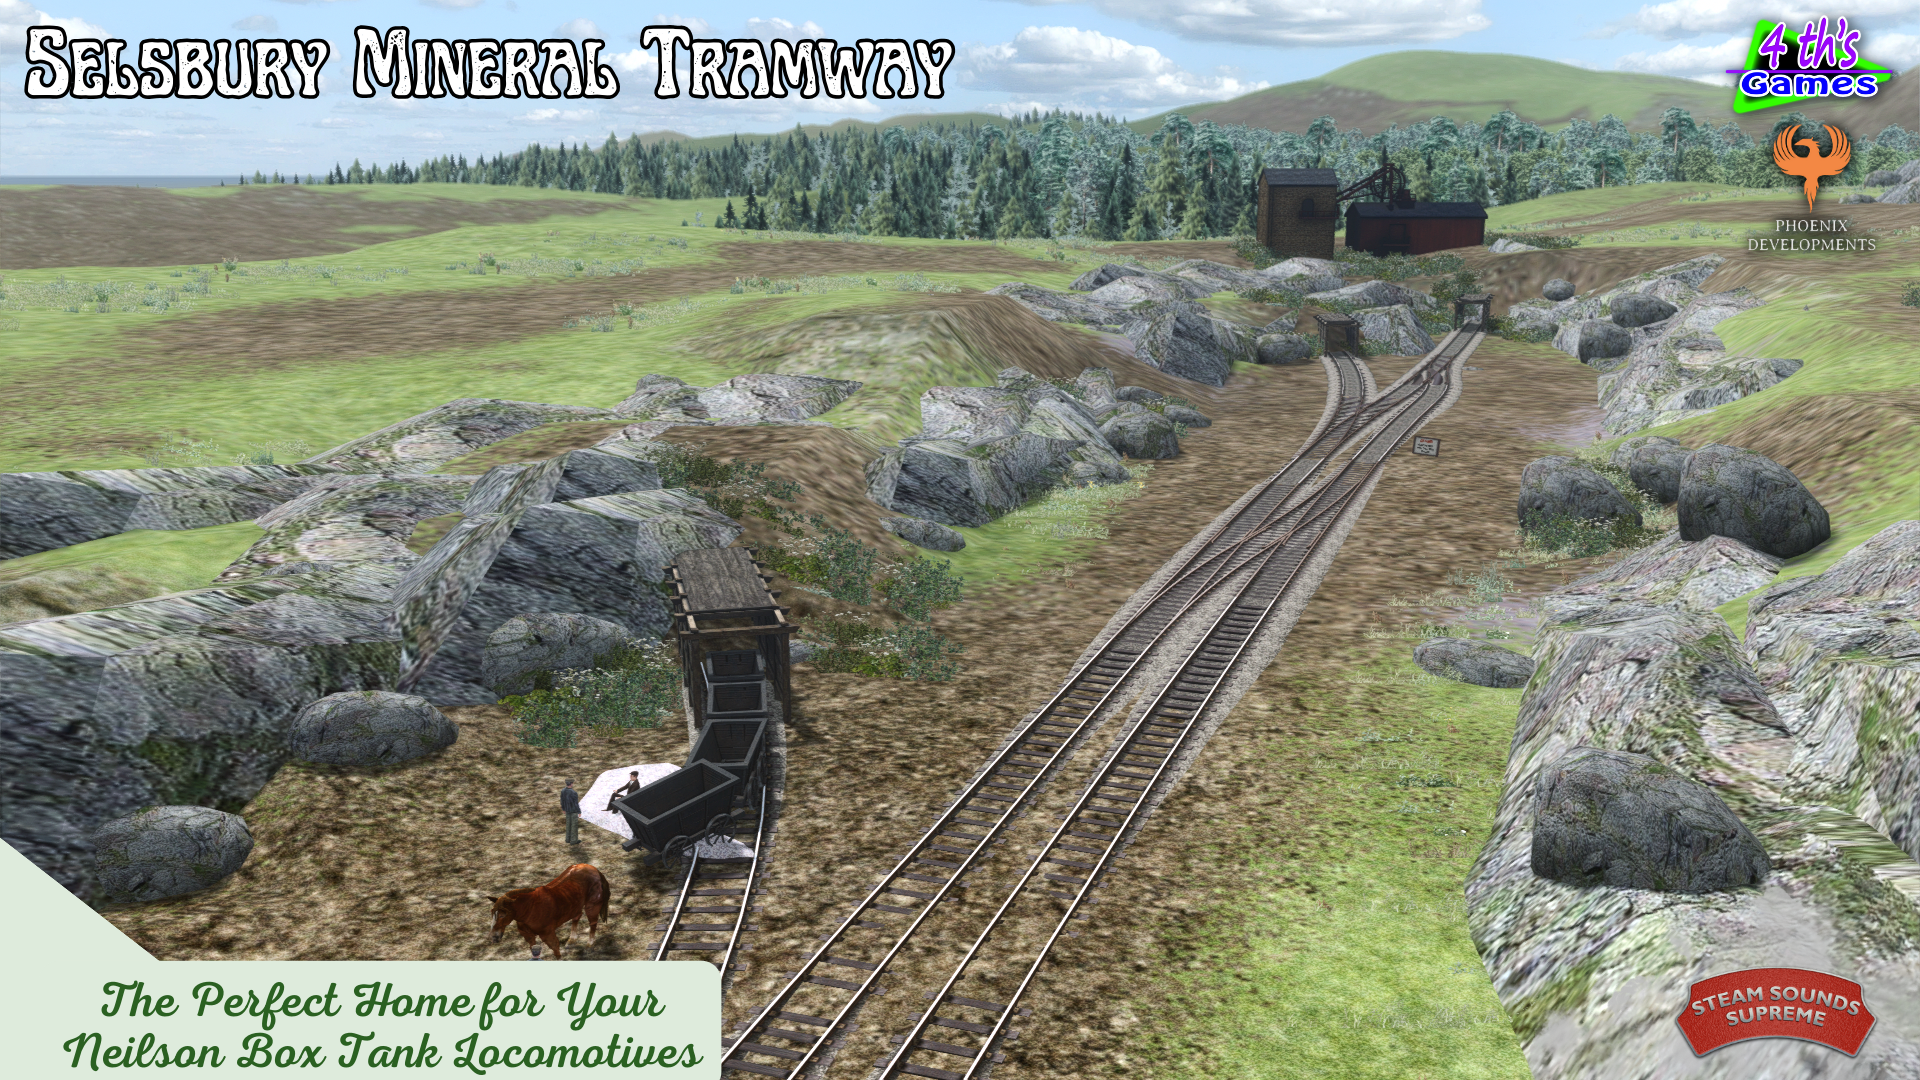 Selsbury Mineral Tramway_Journey24.png